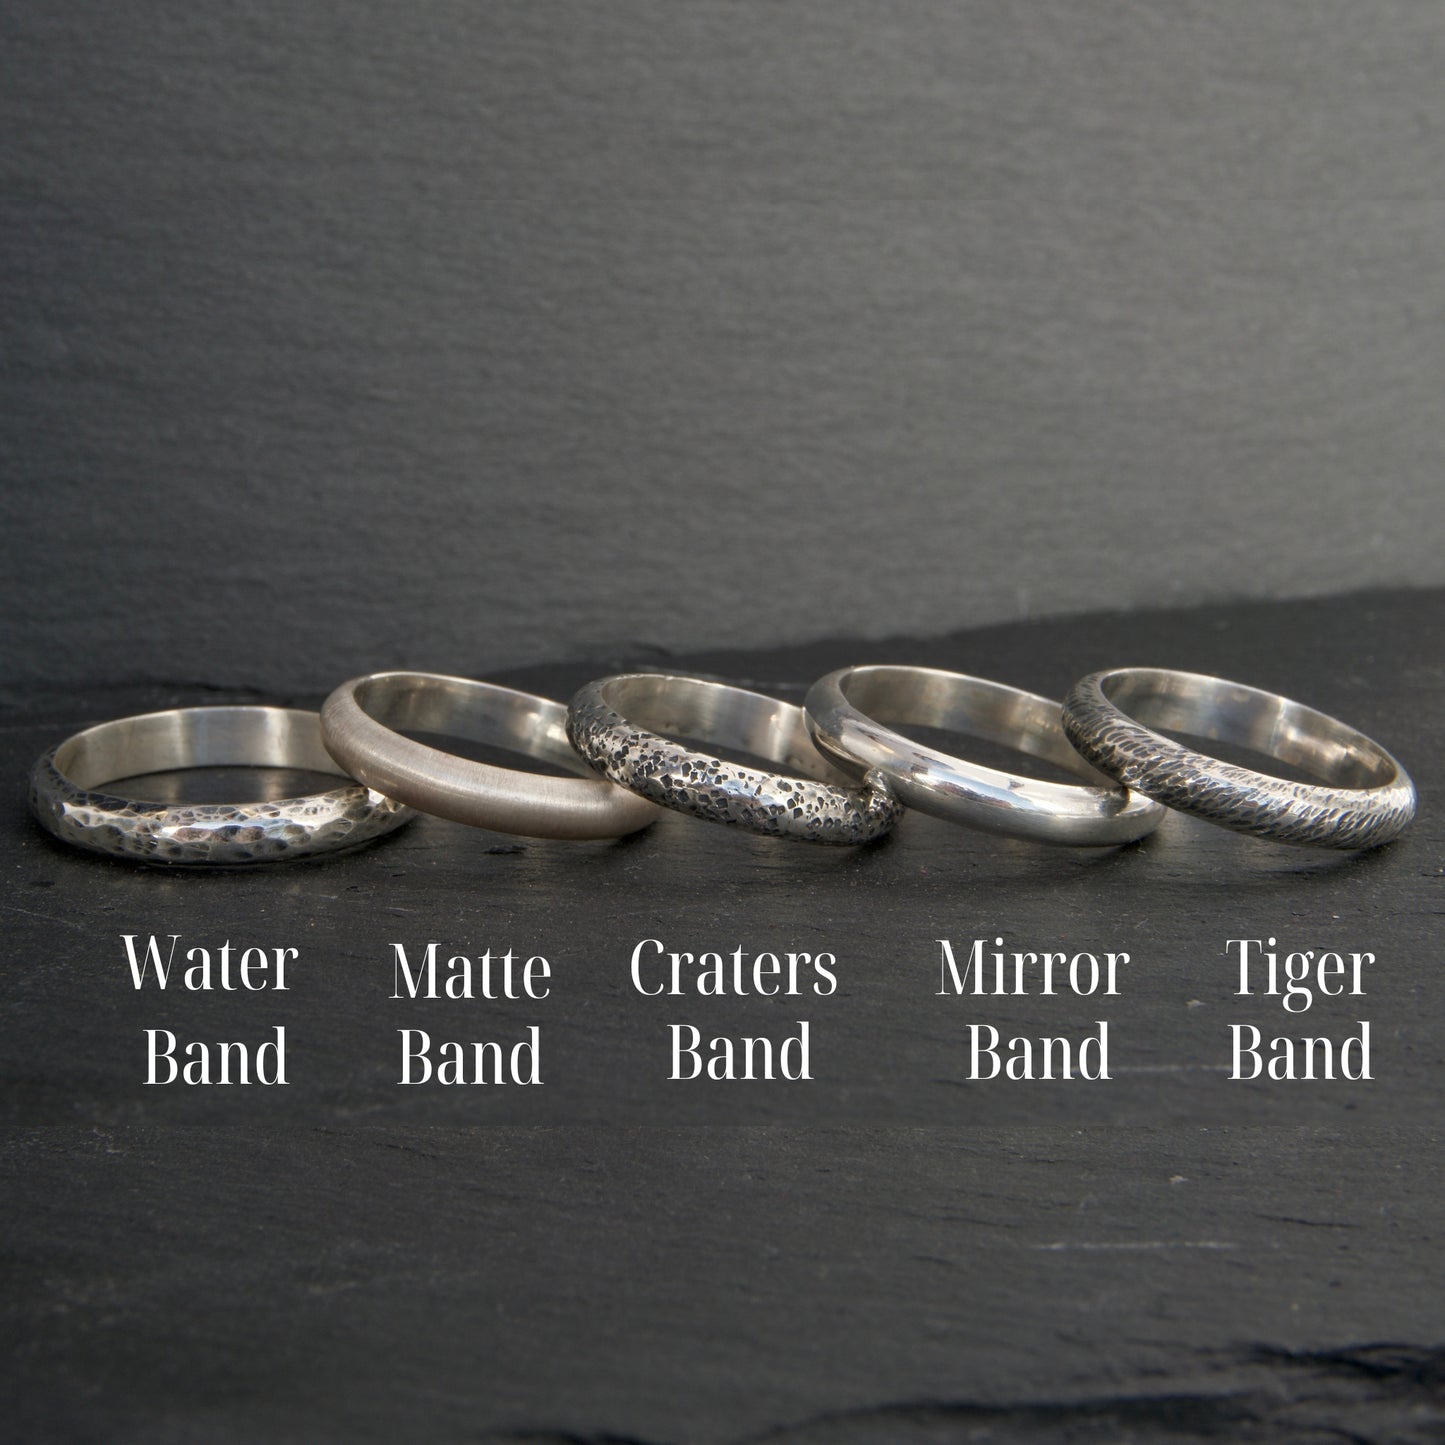 The Matte Band